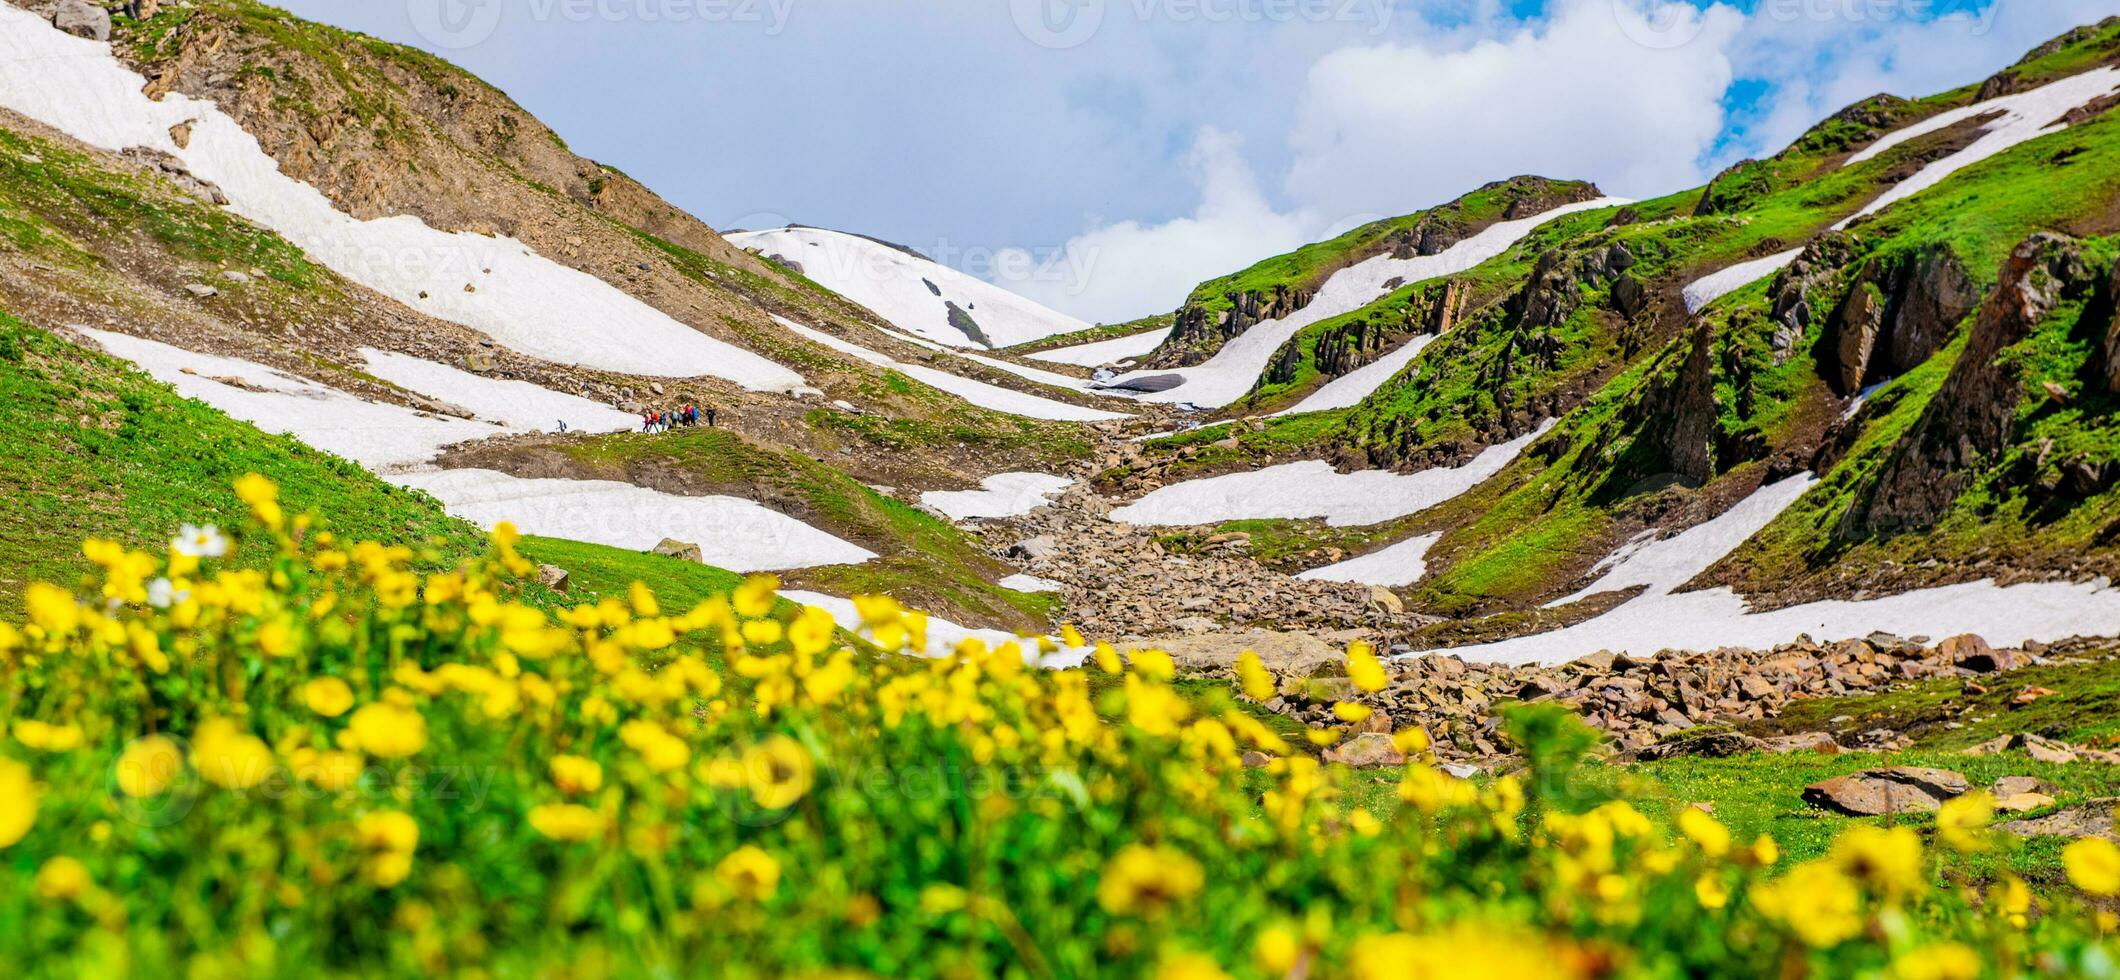 Landscape in the mountains. Panoramic view from the top of Sonmarg, Kashmir valley in the Himalayan region. meadows, alpine trees, wildflowers and snow on mountain in india. Concept travel nature. photo